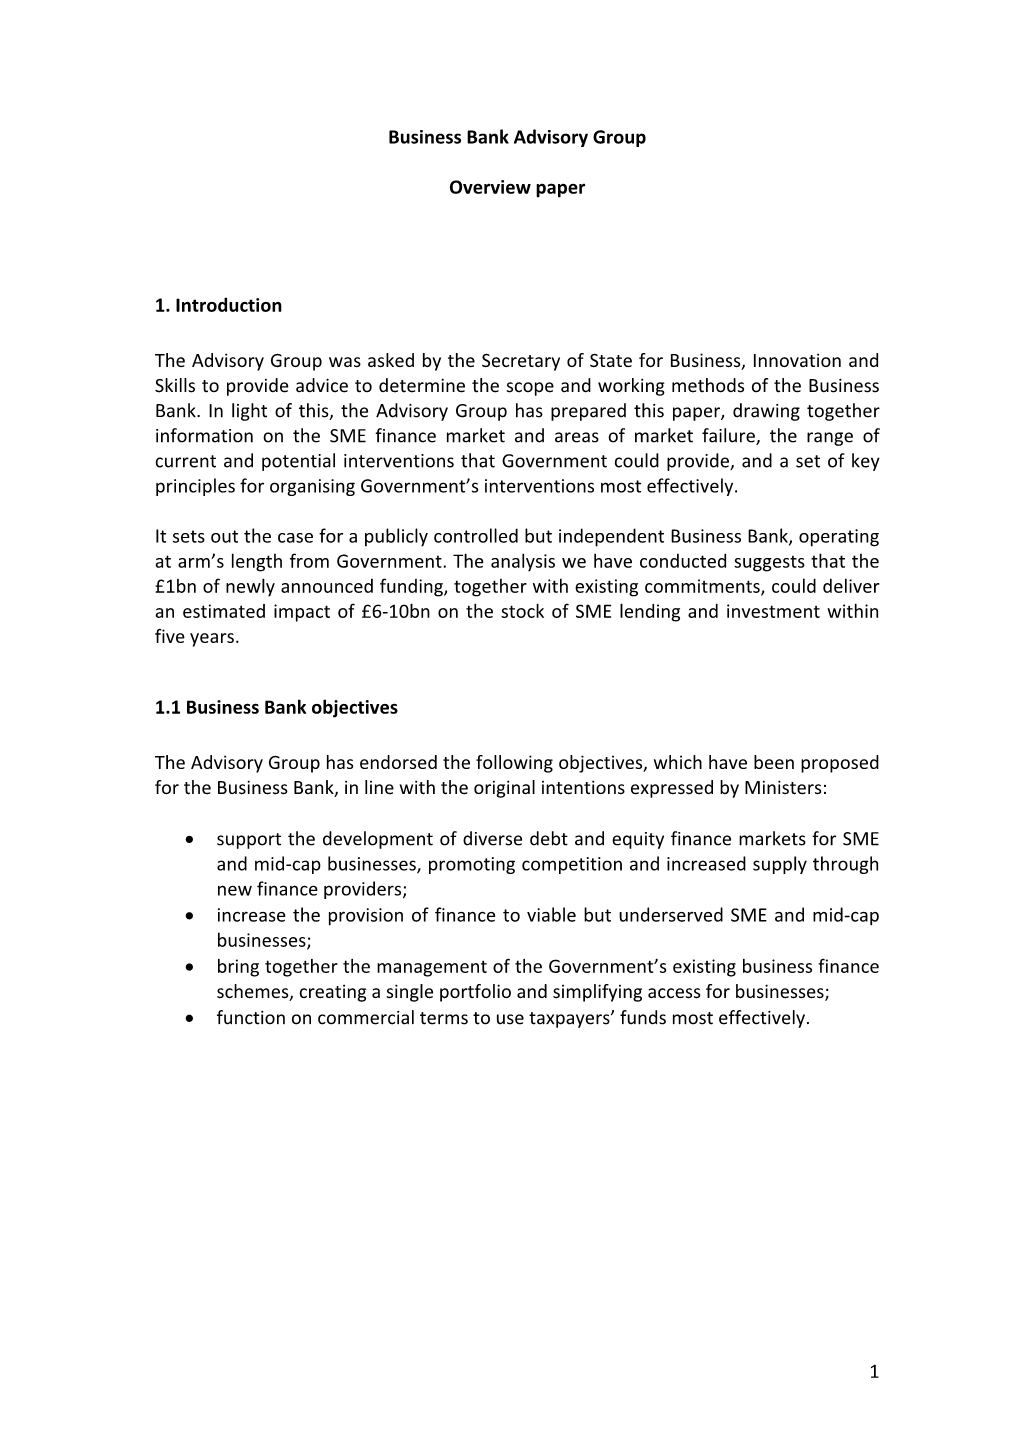 Business Bank Advisory Group: Overview Paper